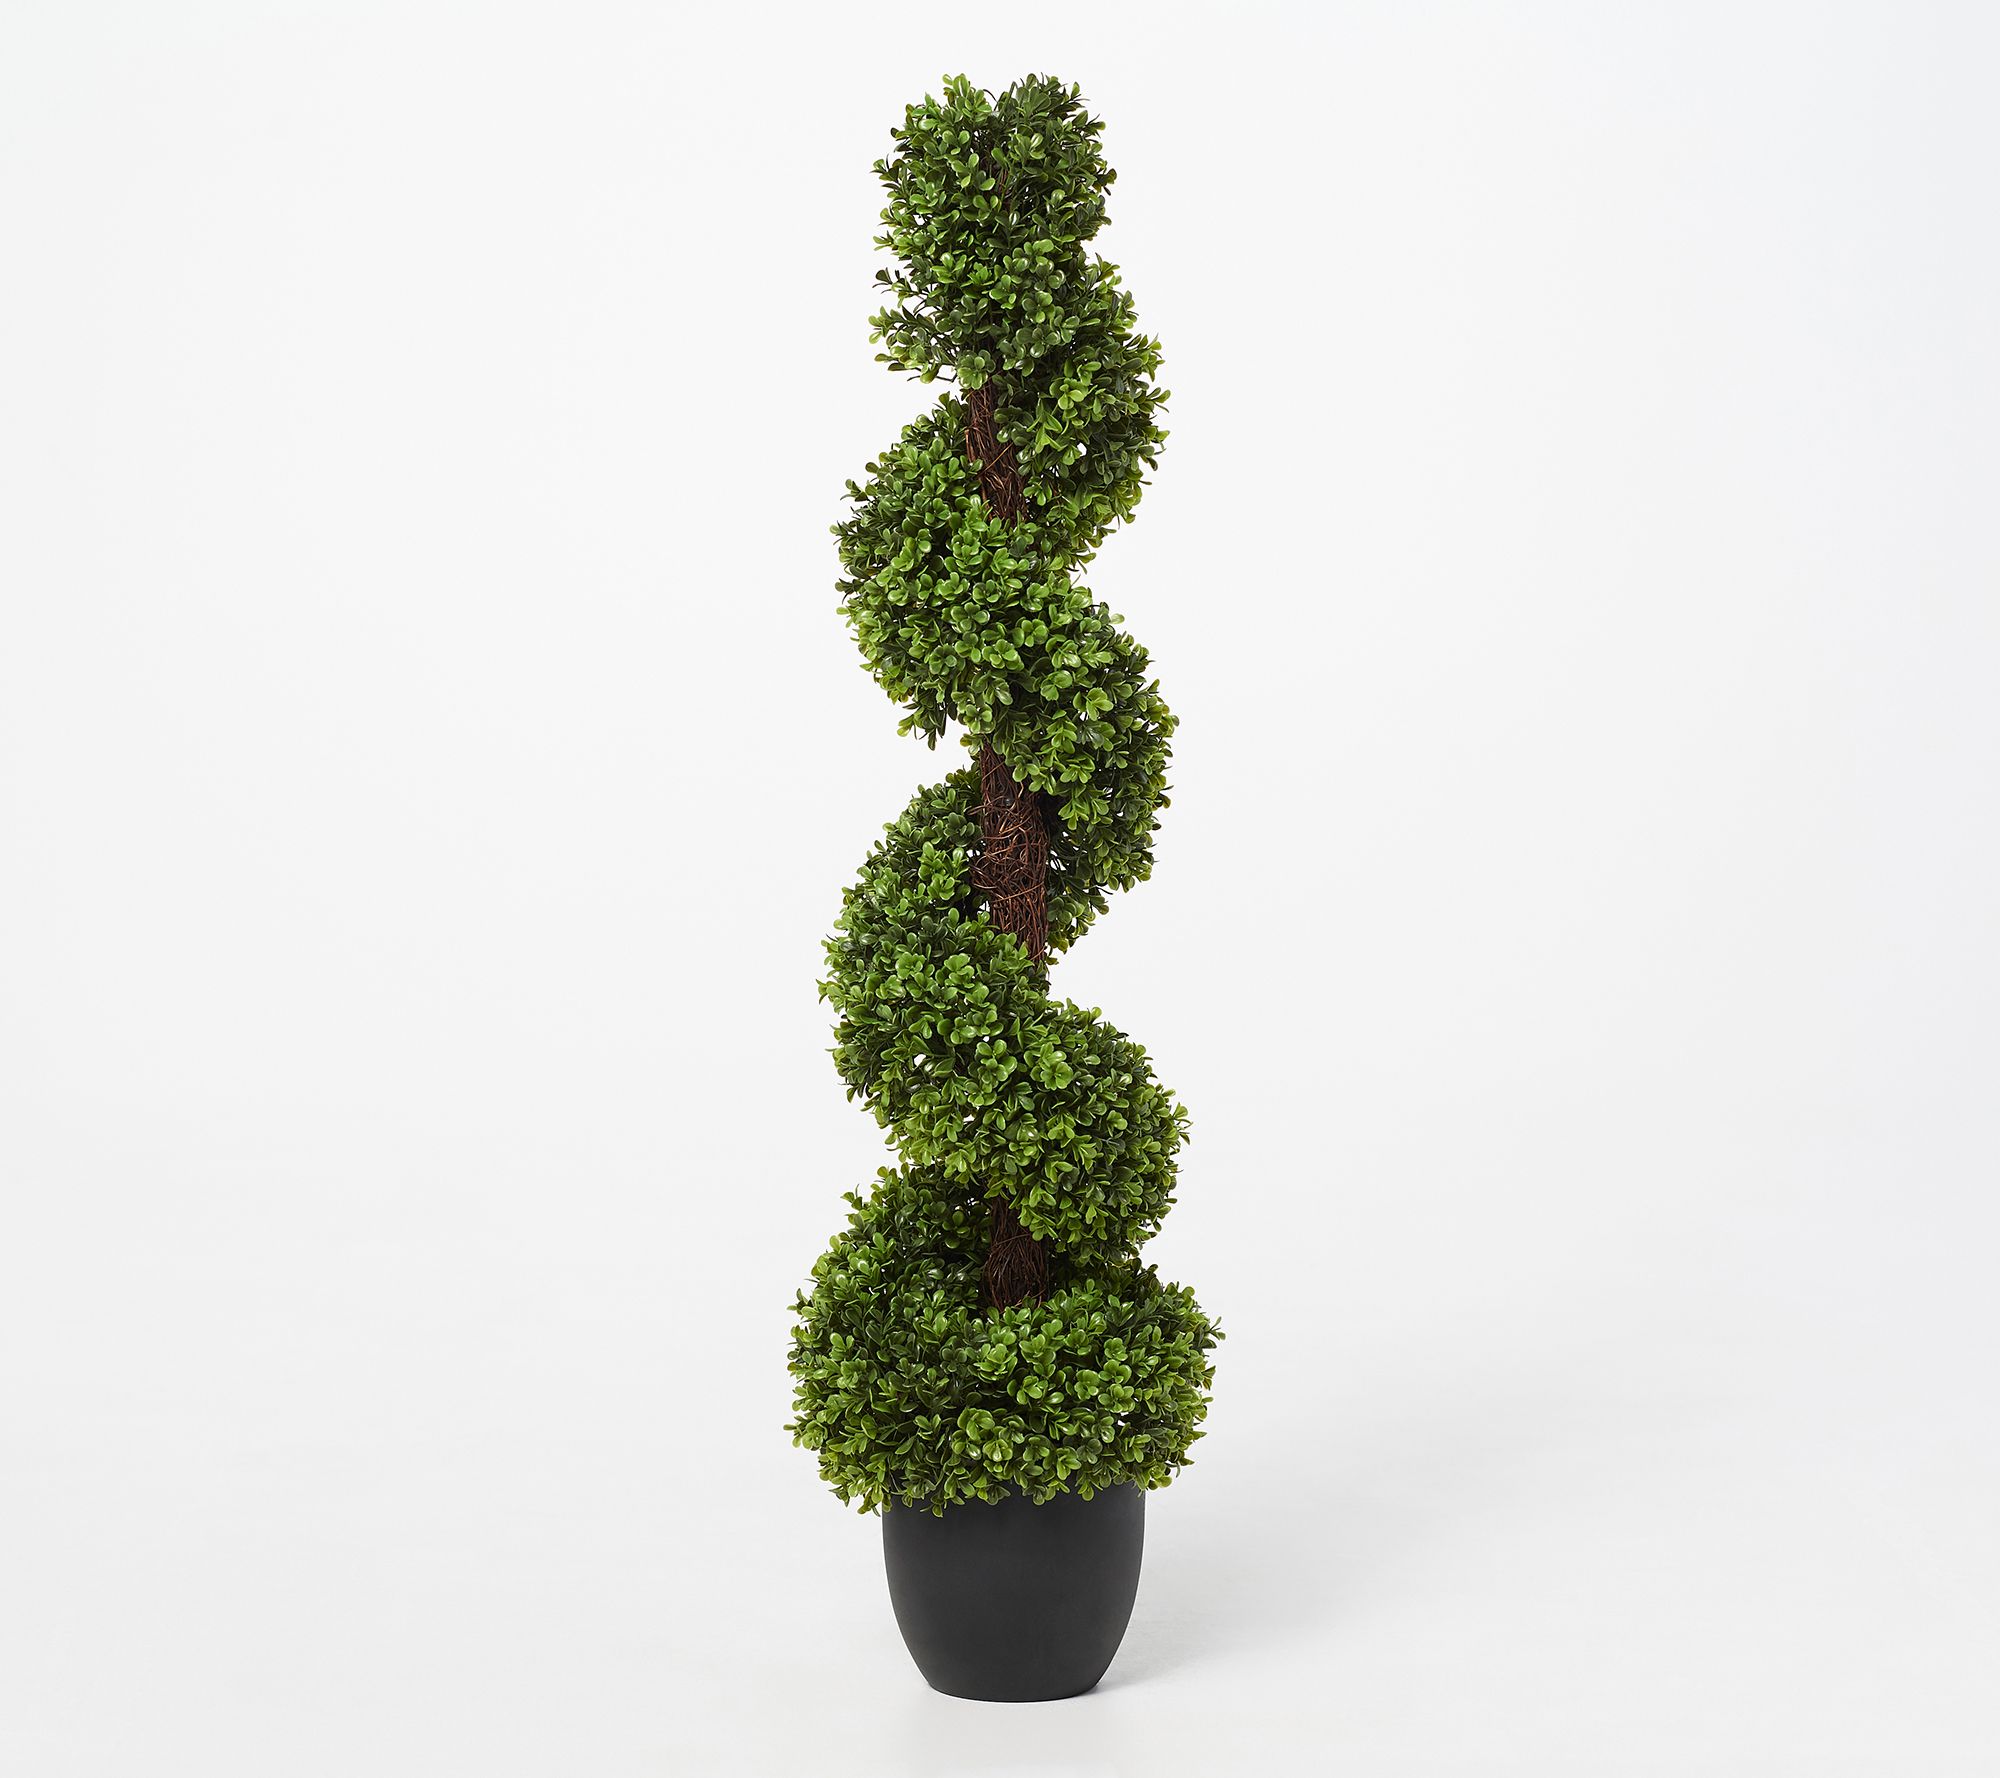 42" Indoor/ Outdoor Spiral Boxwood Topiary by Valerie Valerie Parr Hill 